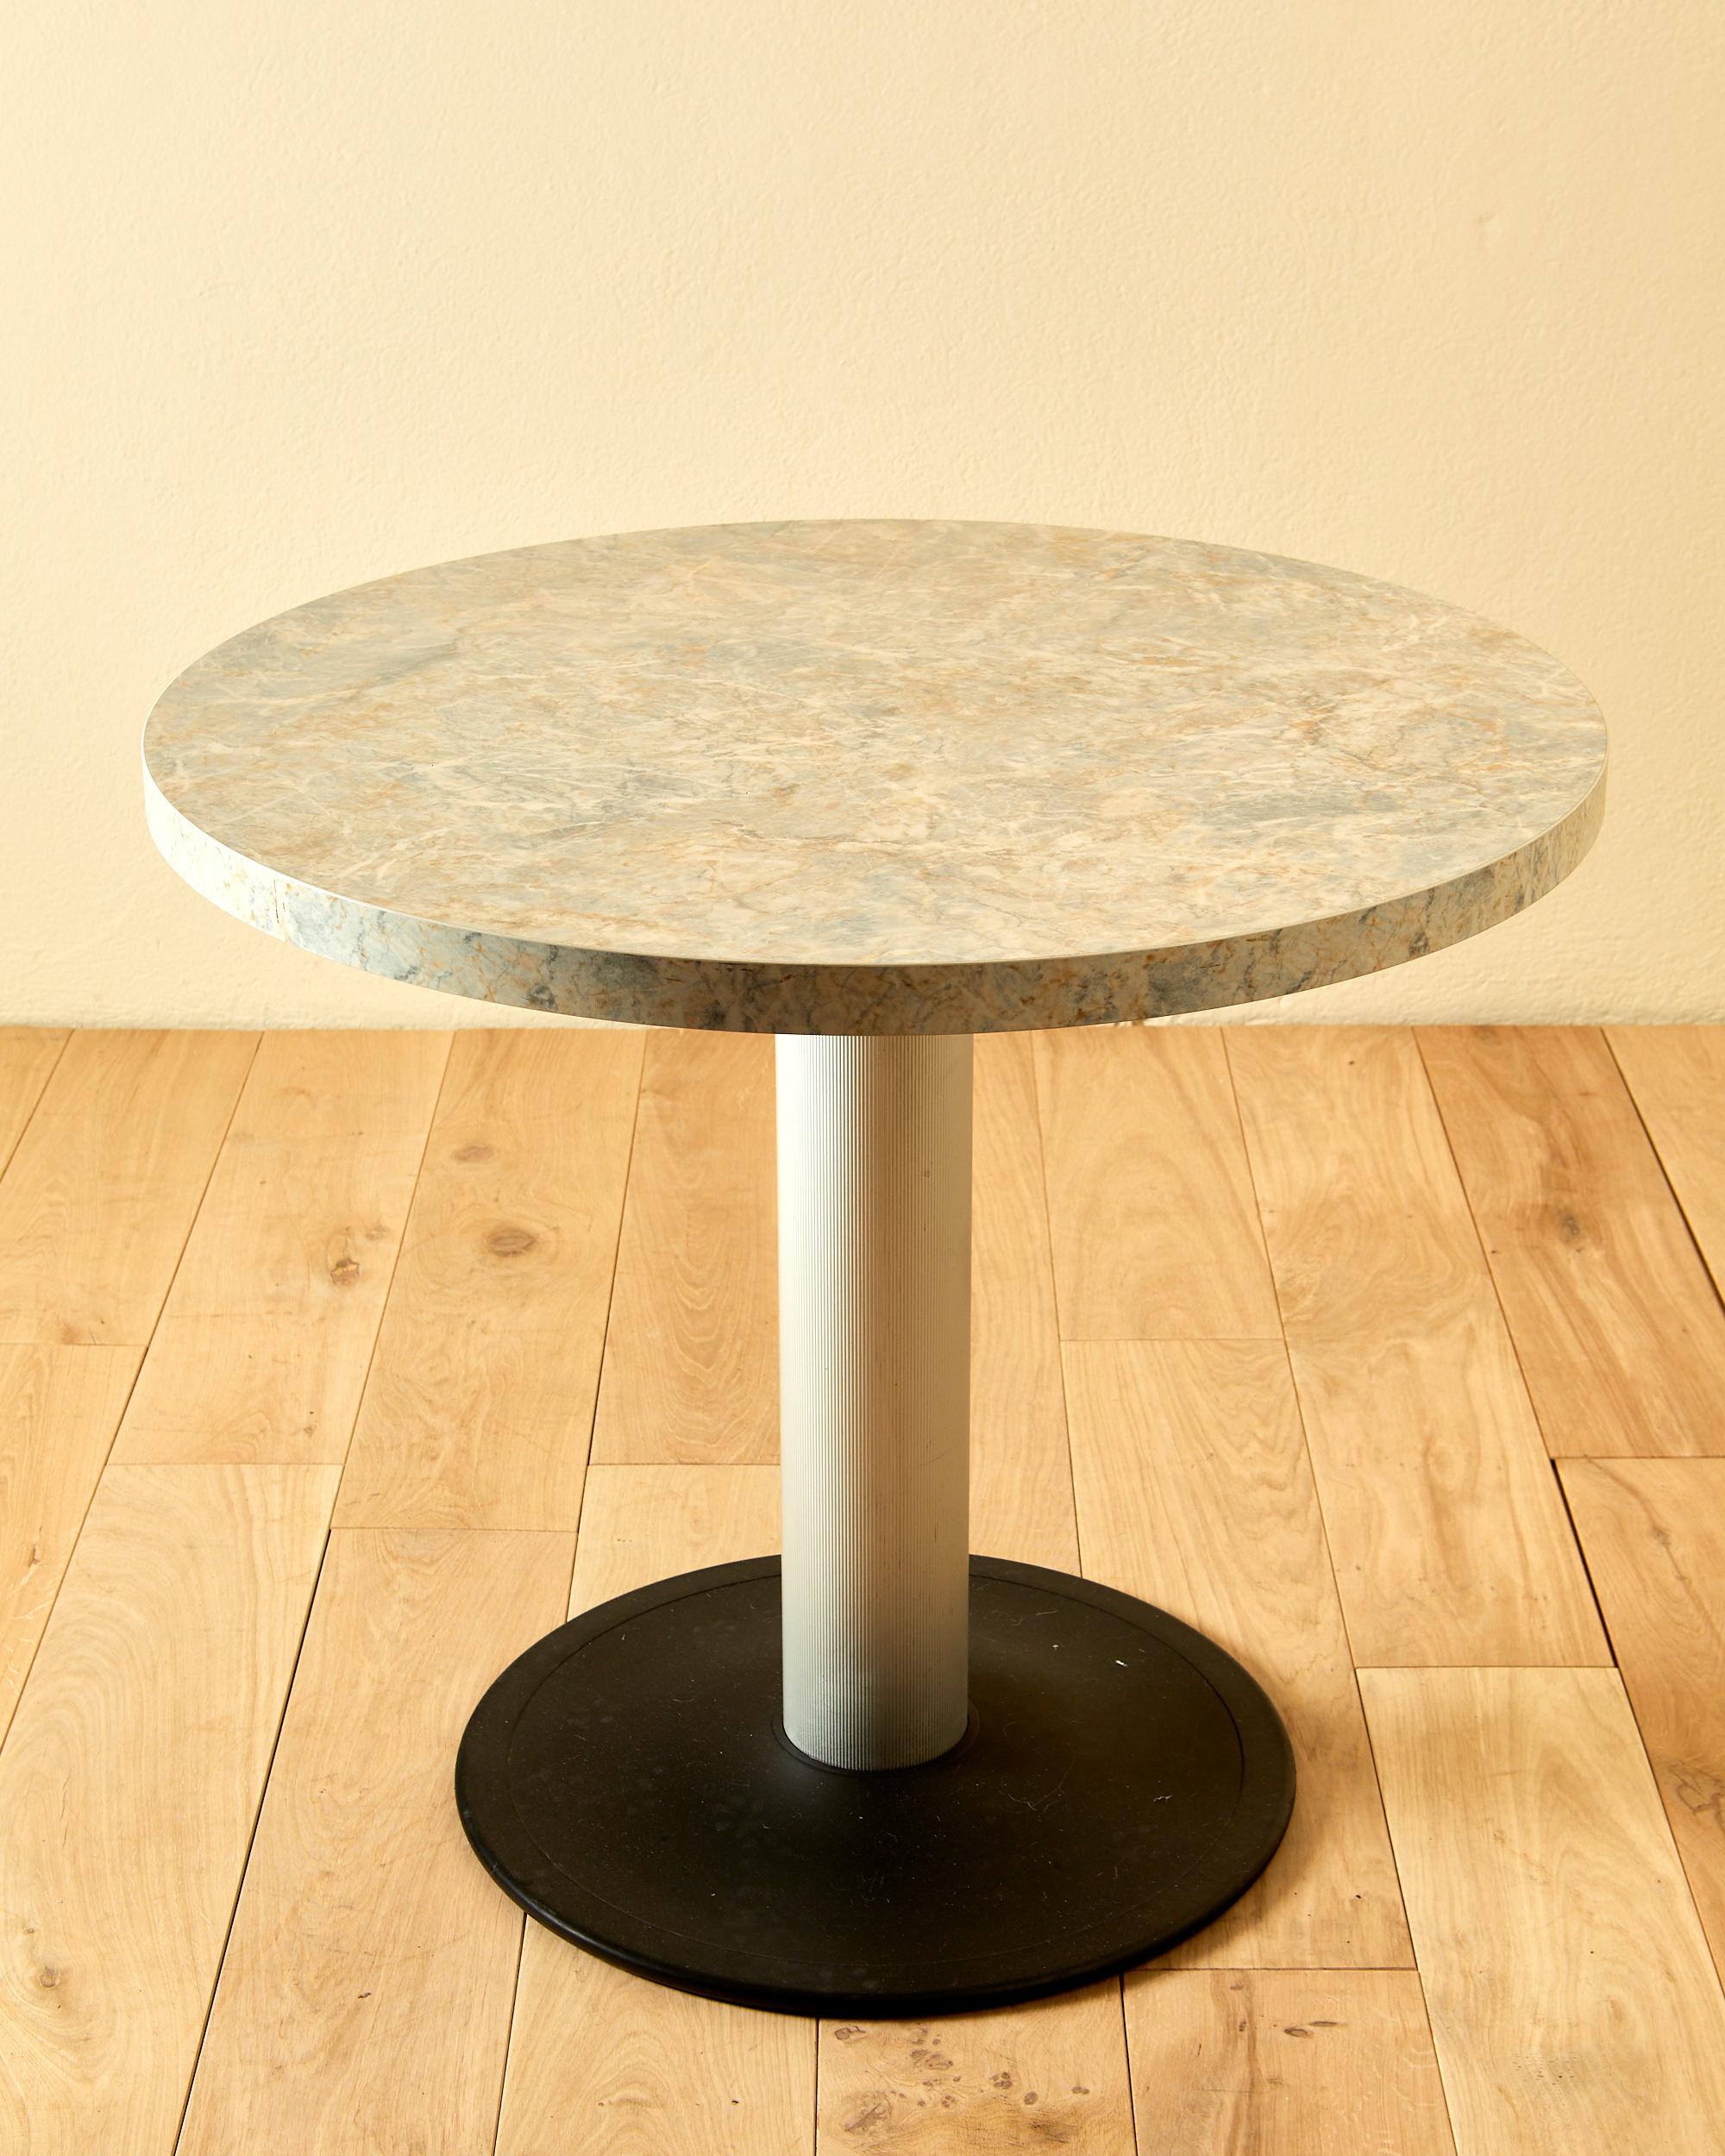 Modern Menphis, Console Table, Iron and Aluminum Base, Formica Top in Marble Imitation